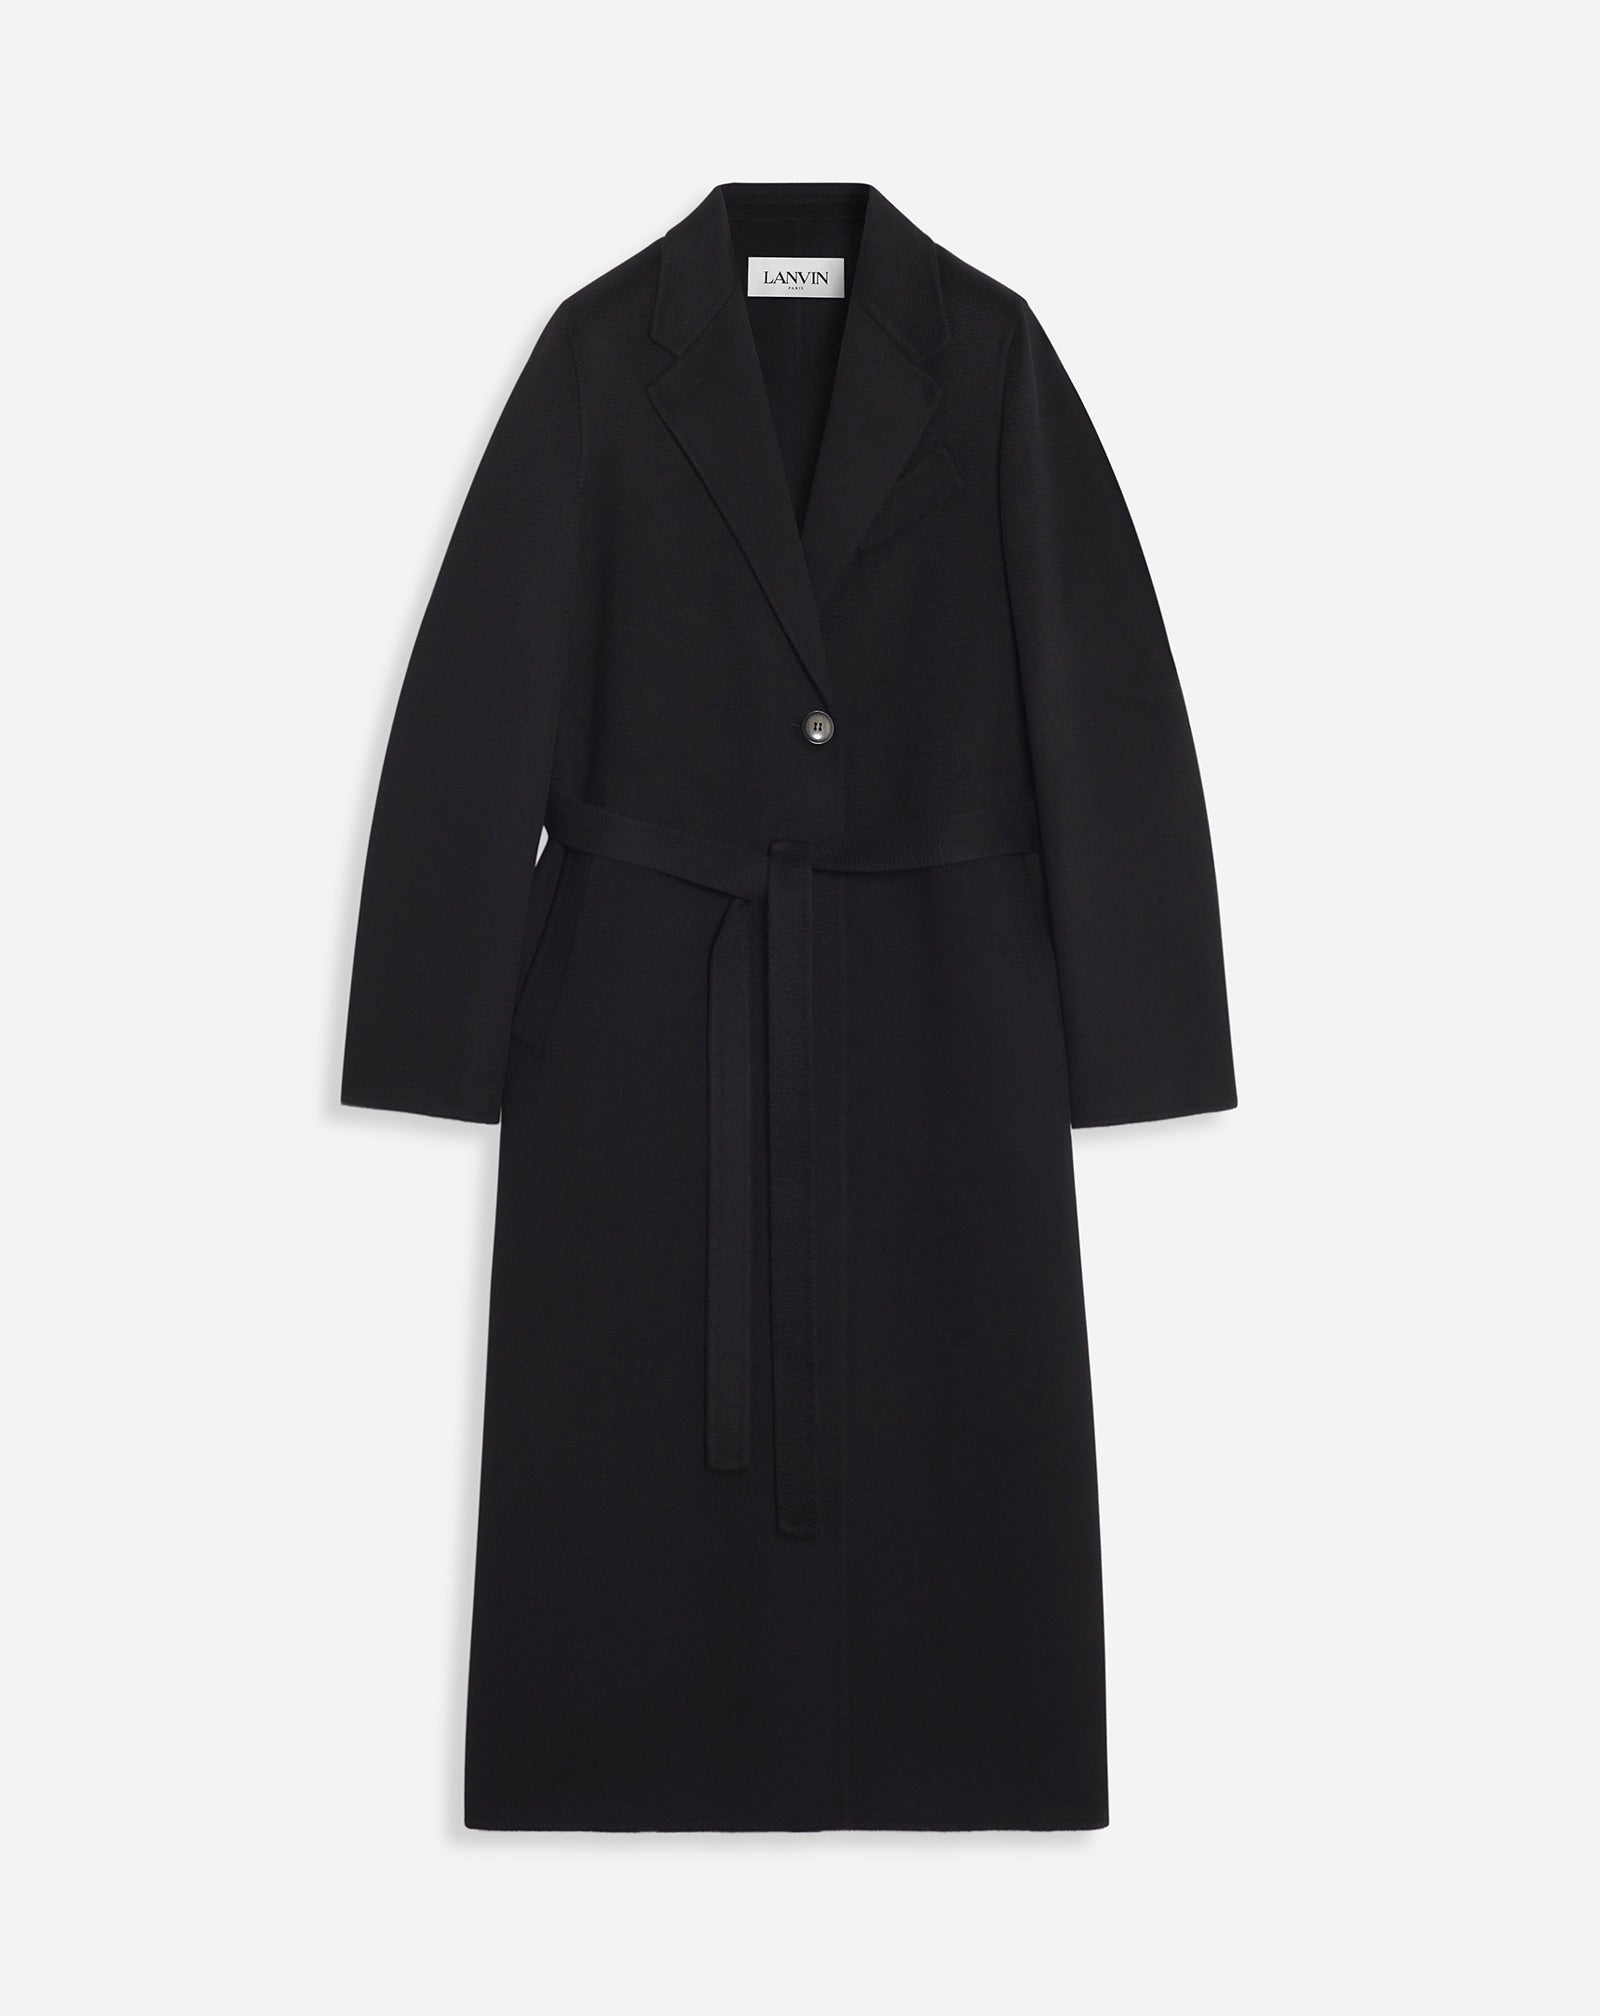 SINGLE-BREASTED TAILORED COAT IN PURE CASHMERE 